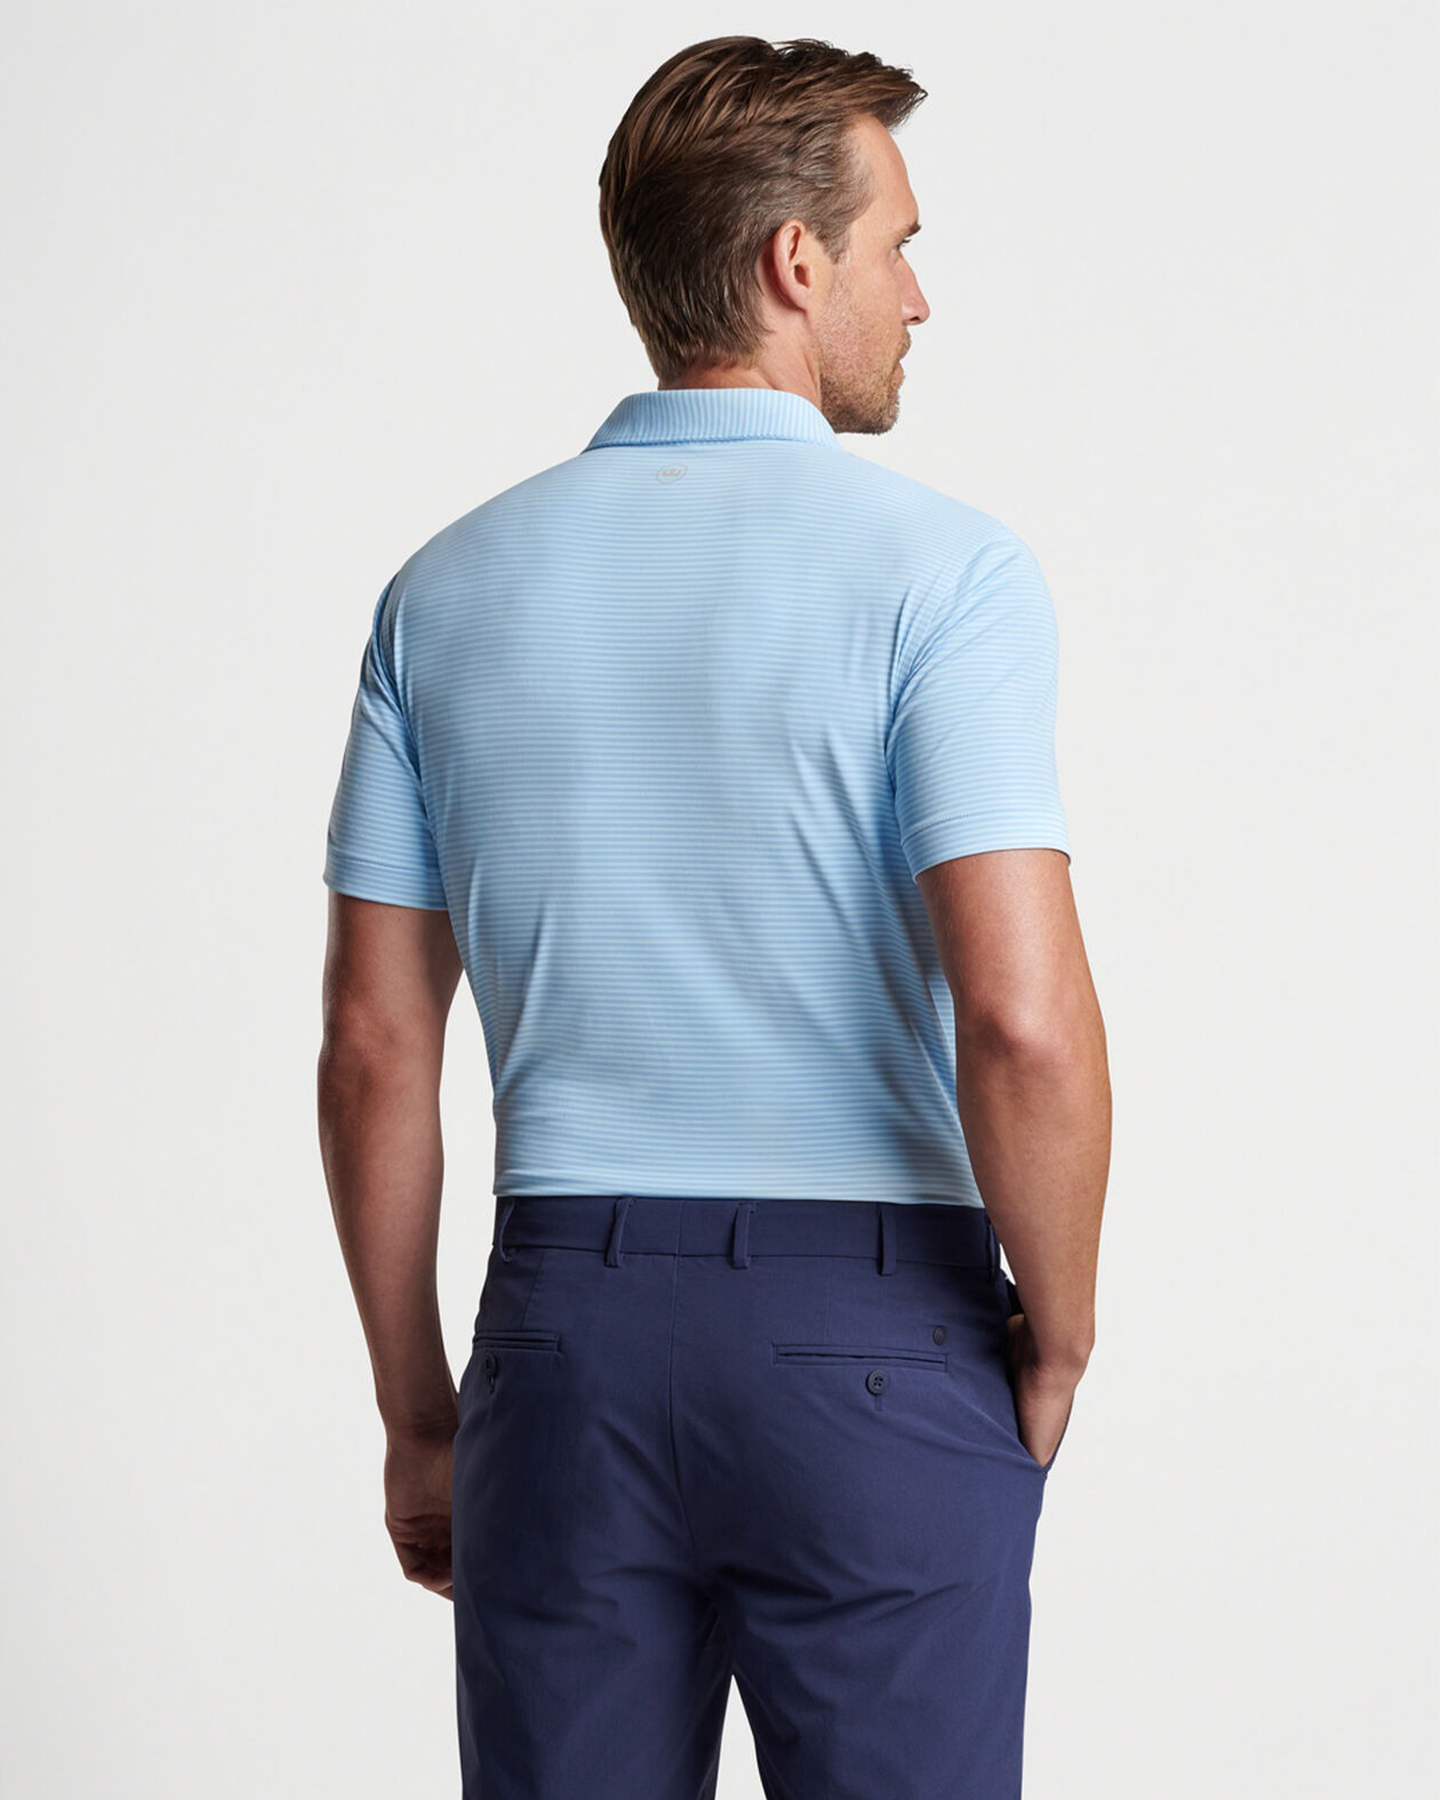 AMBROSE PERFORMANCE JERSEY POLO - BLUE FROST